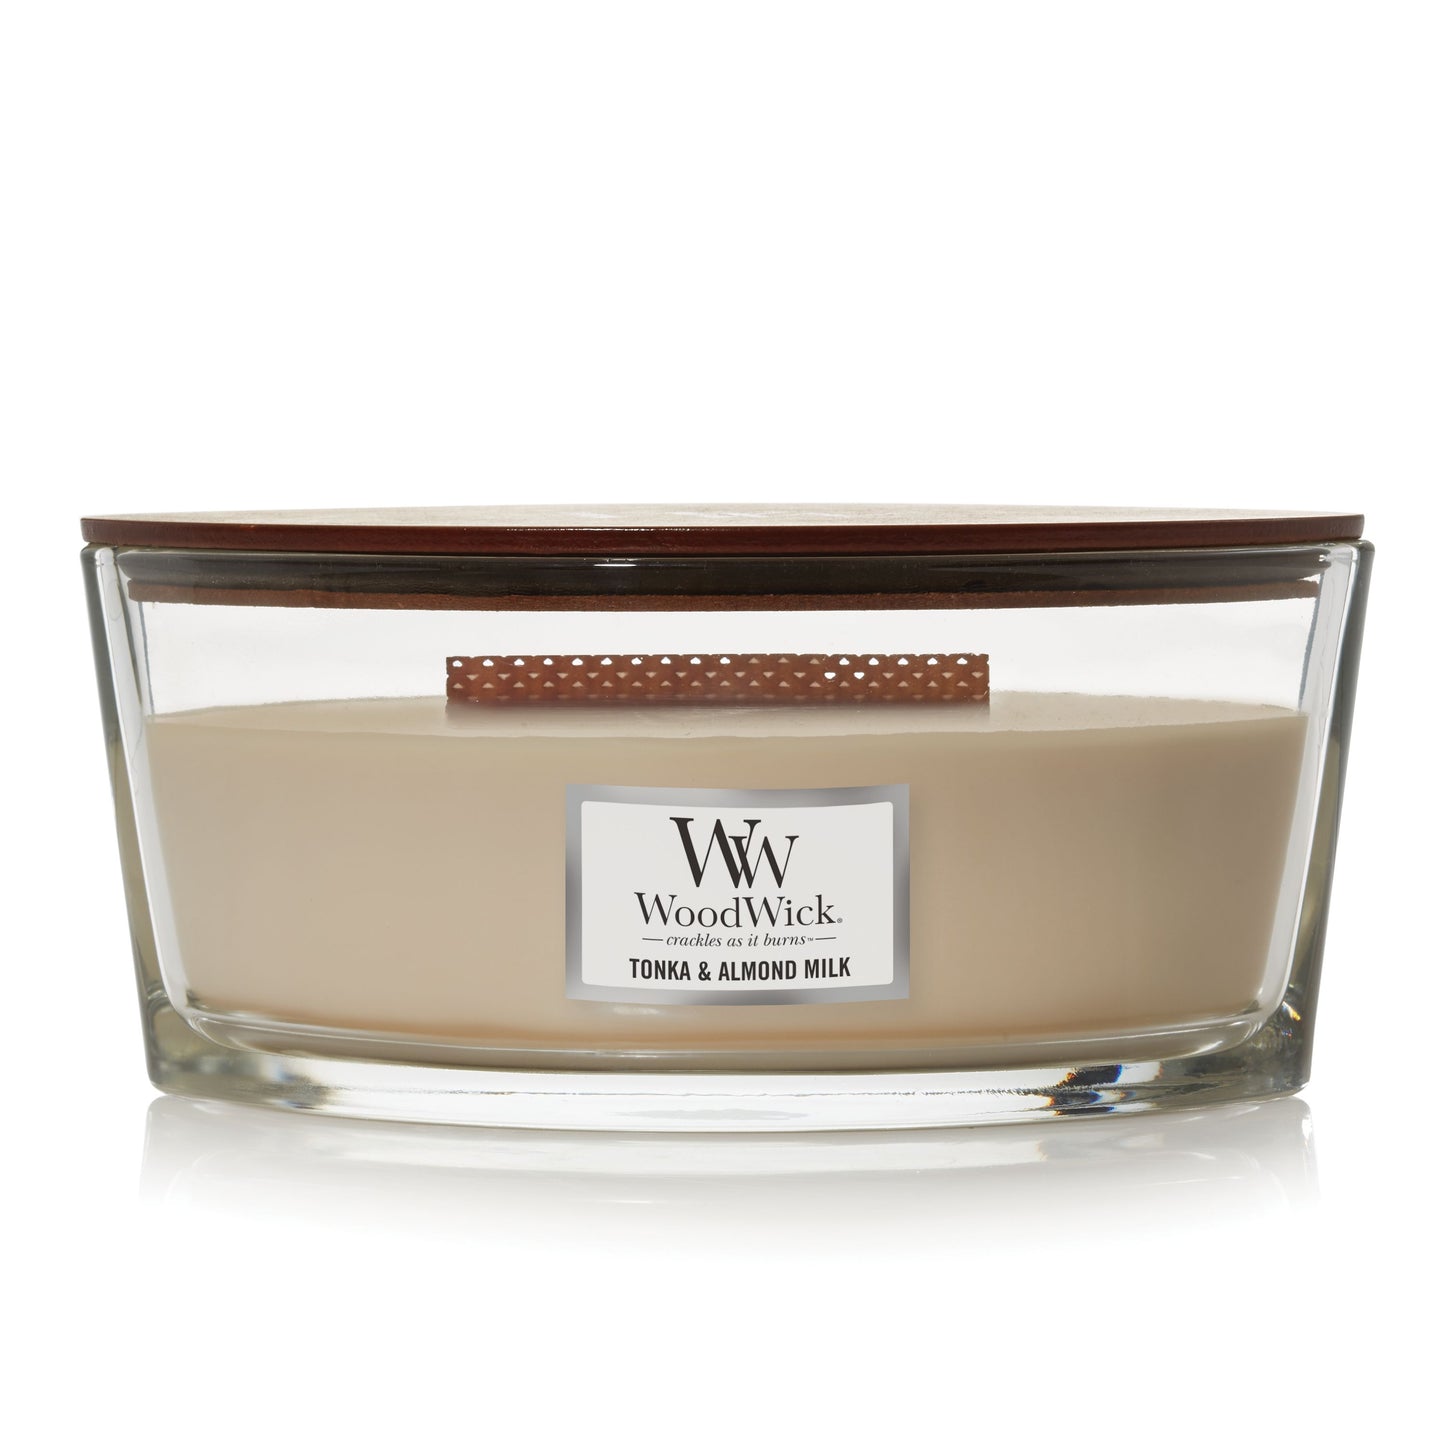 TONKA AND ALMOND MILK - Ellipse HearthWick Flame Scented Candle by WoodWick